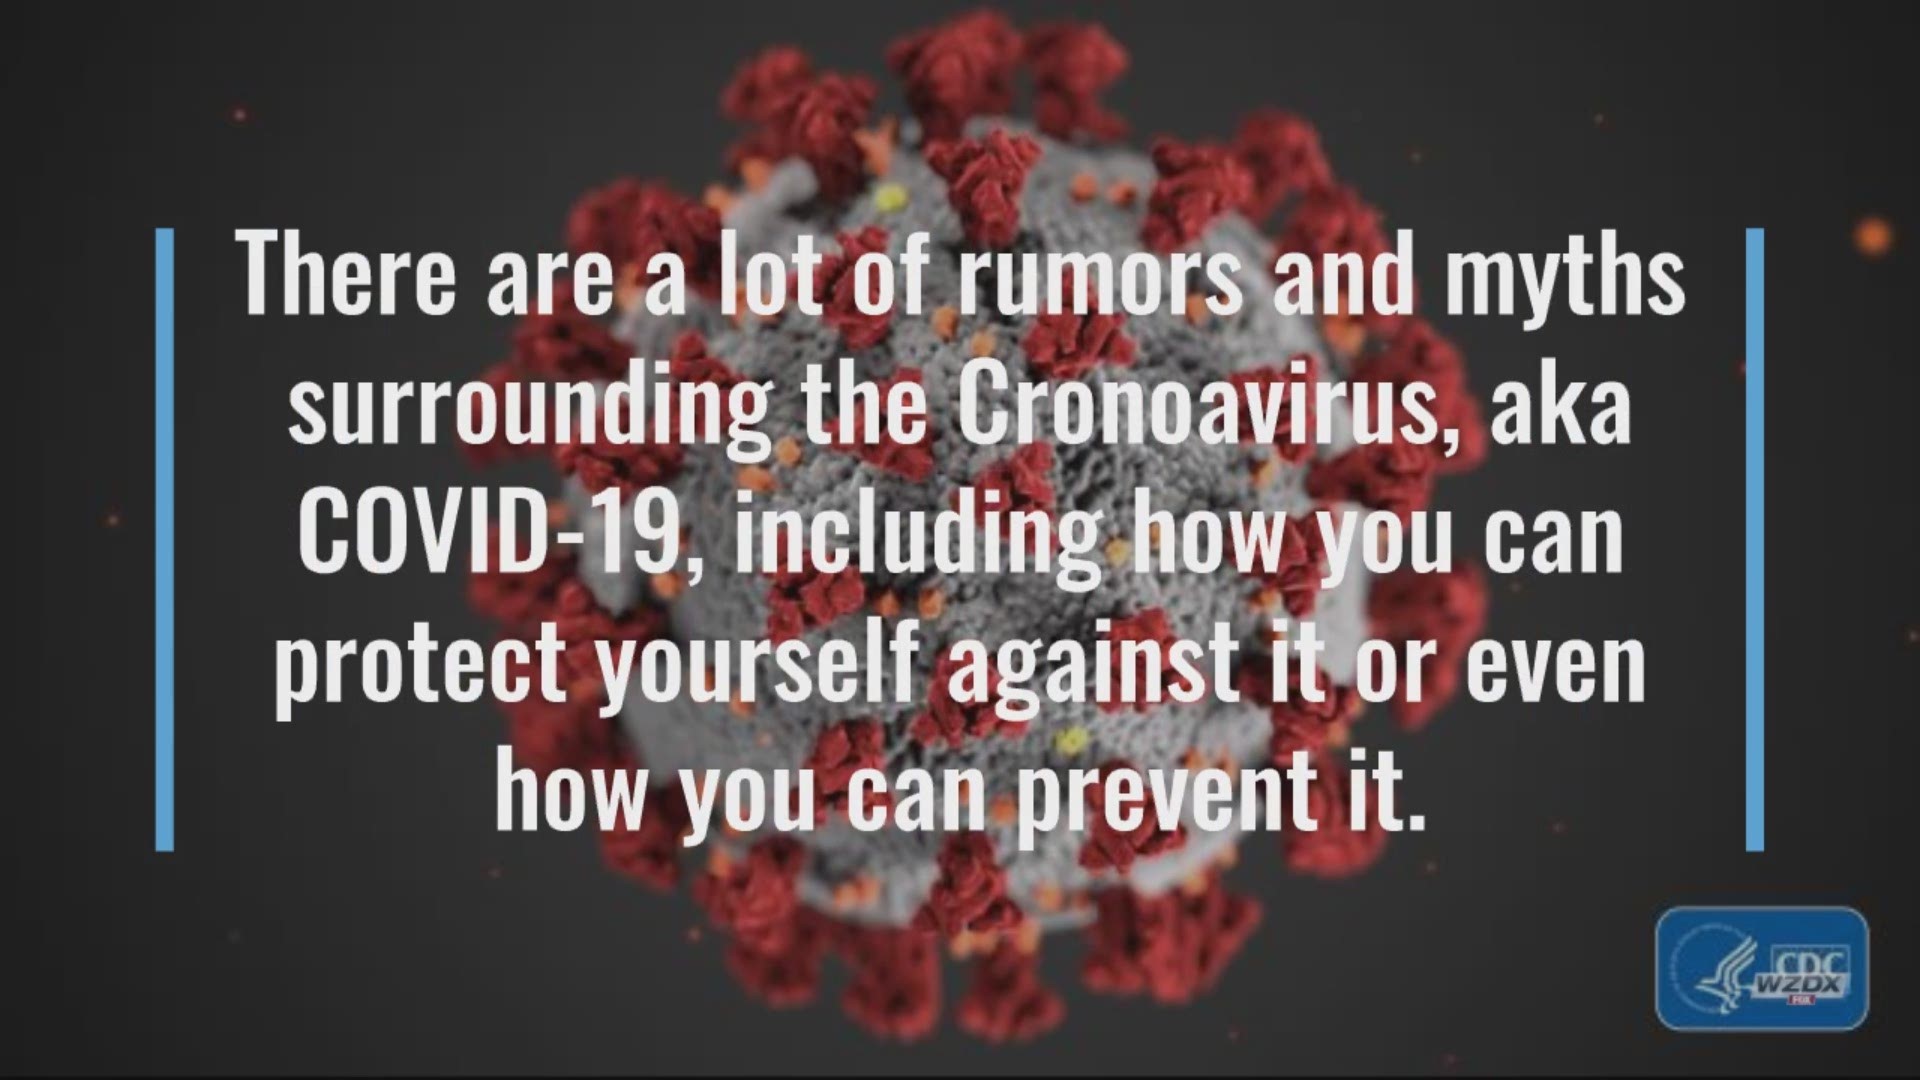 Can garlic protect you from coronavirus? How about UV light, vaccines, or sesame oil?